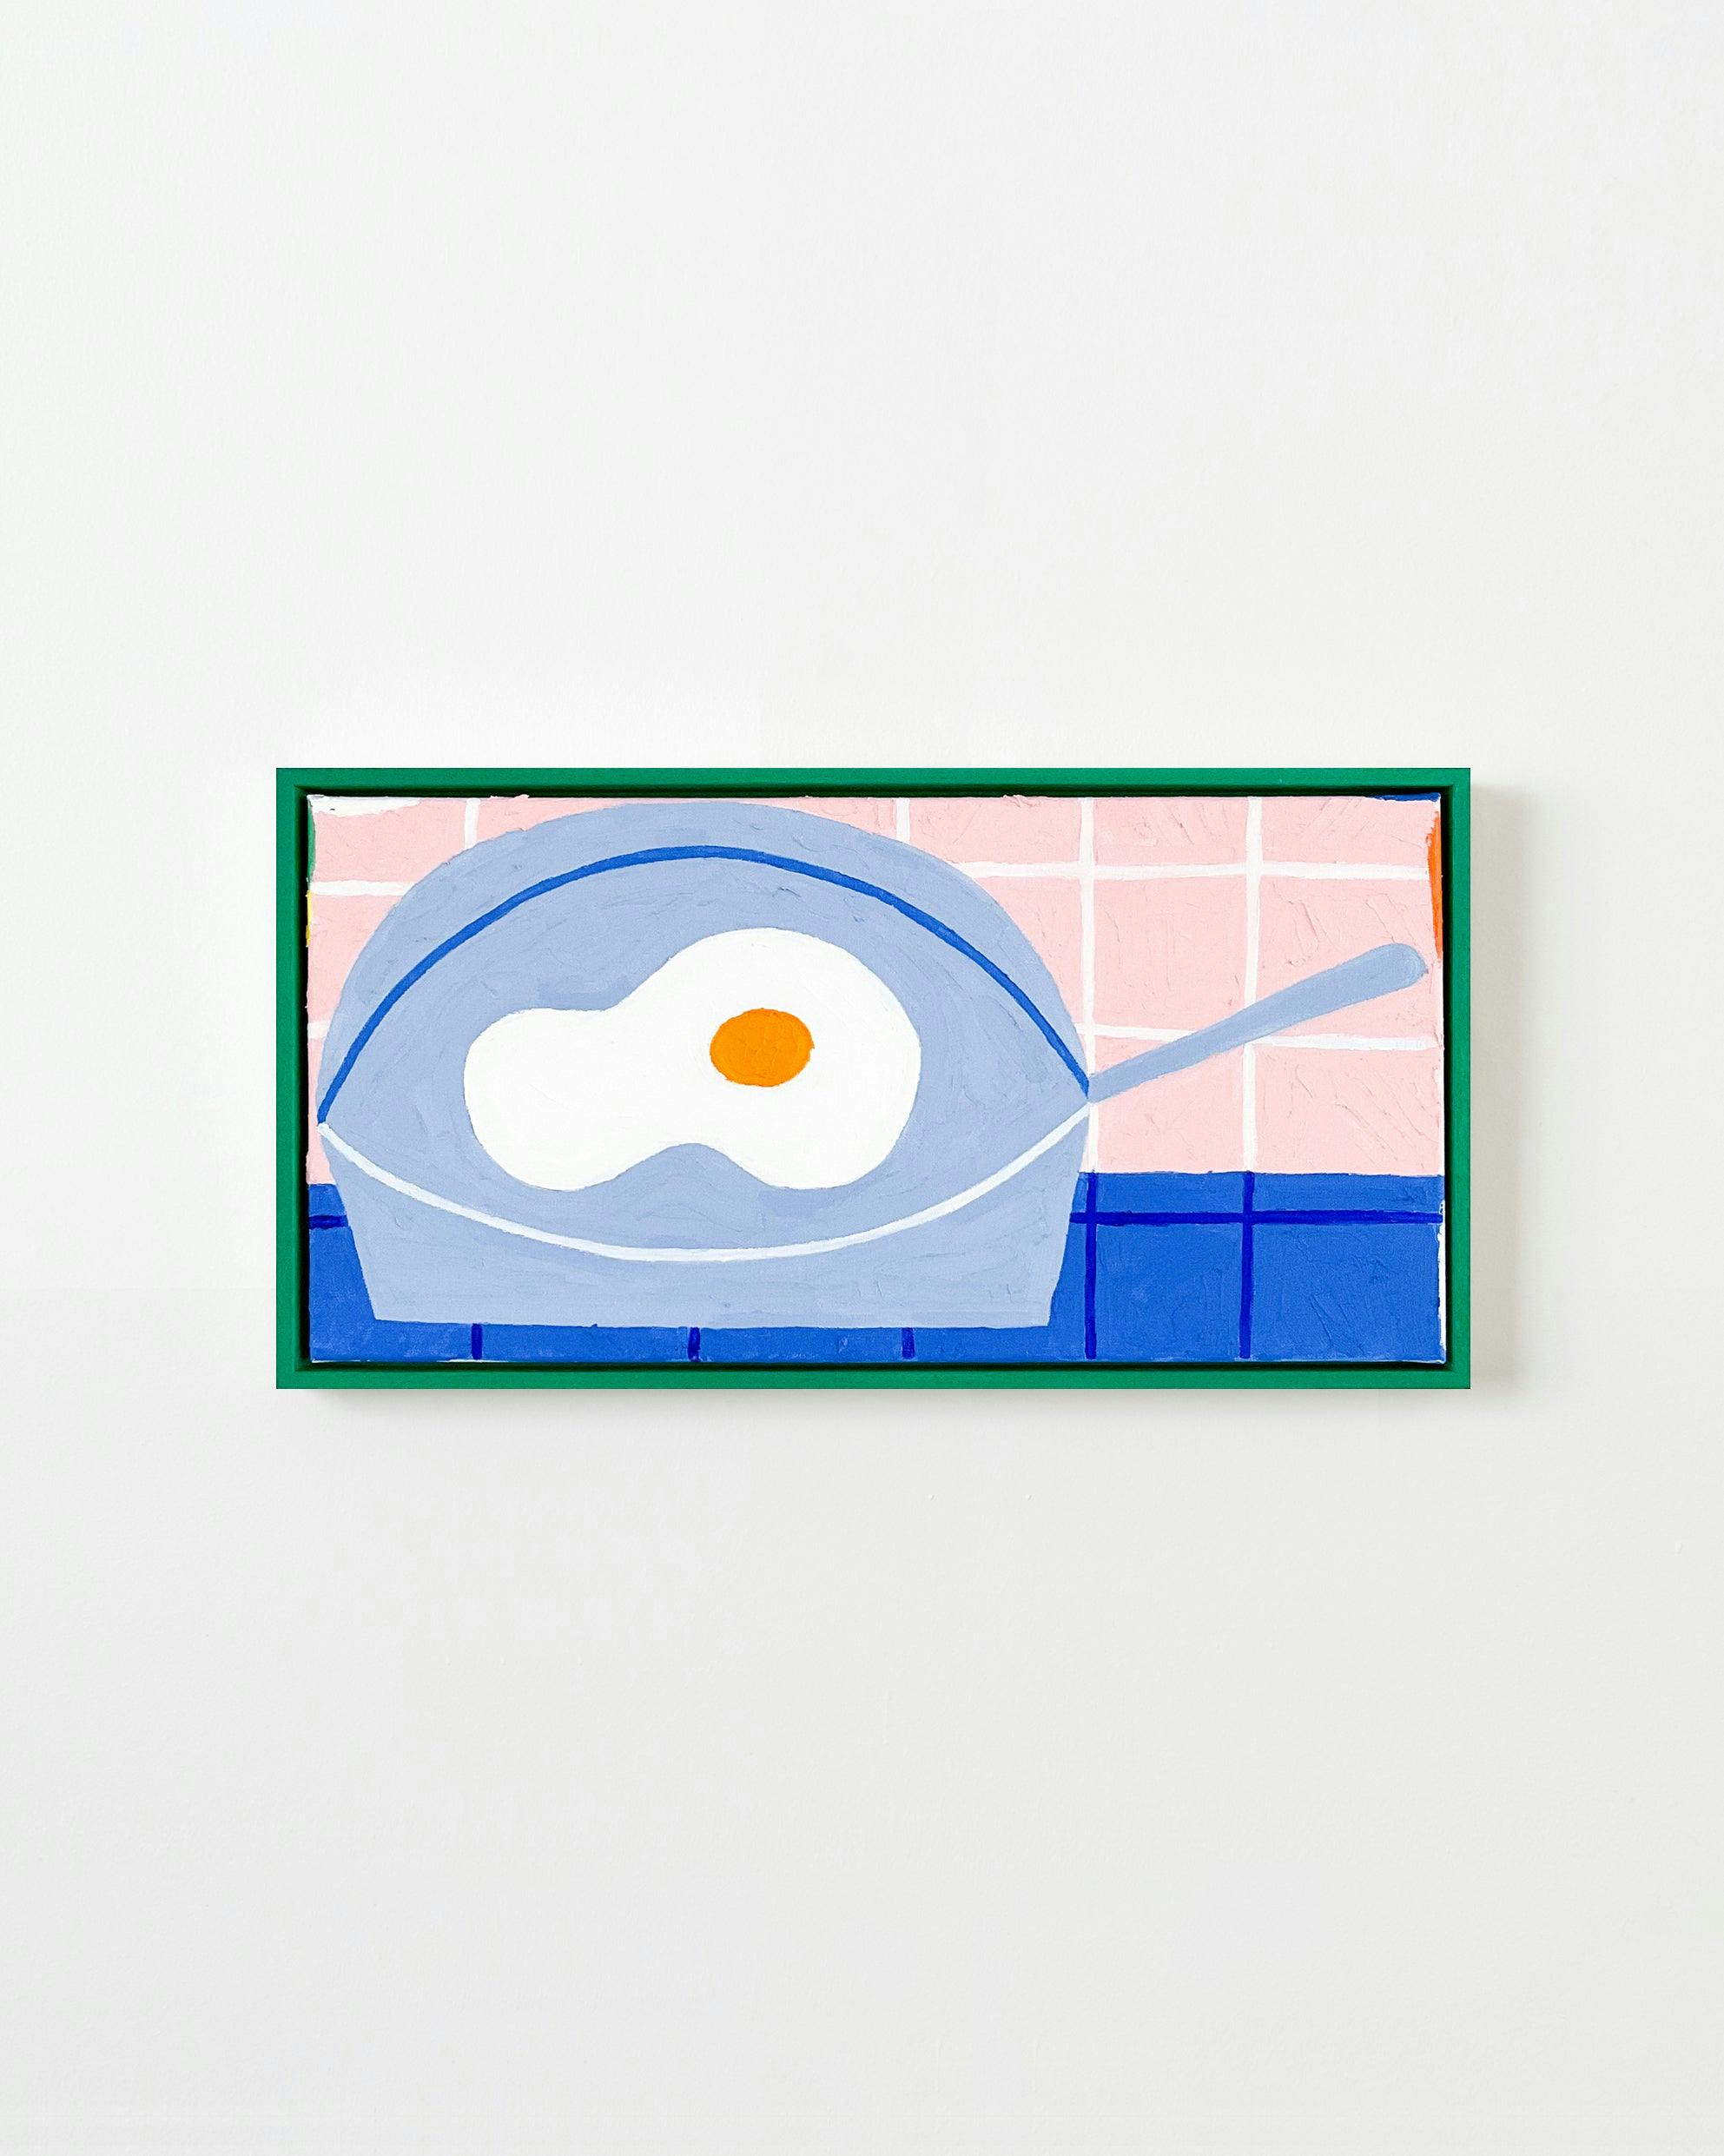 Painting by Frederique Matti titled "Egg".